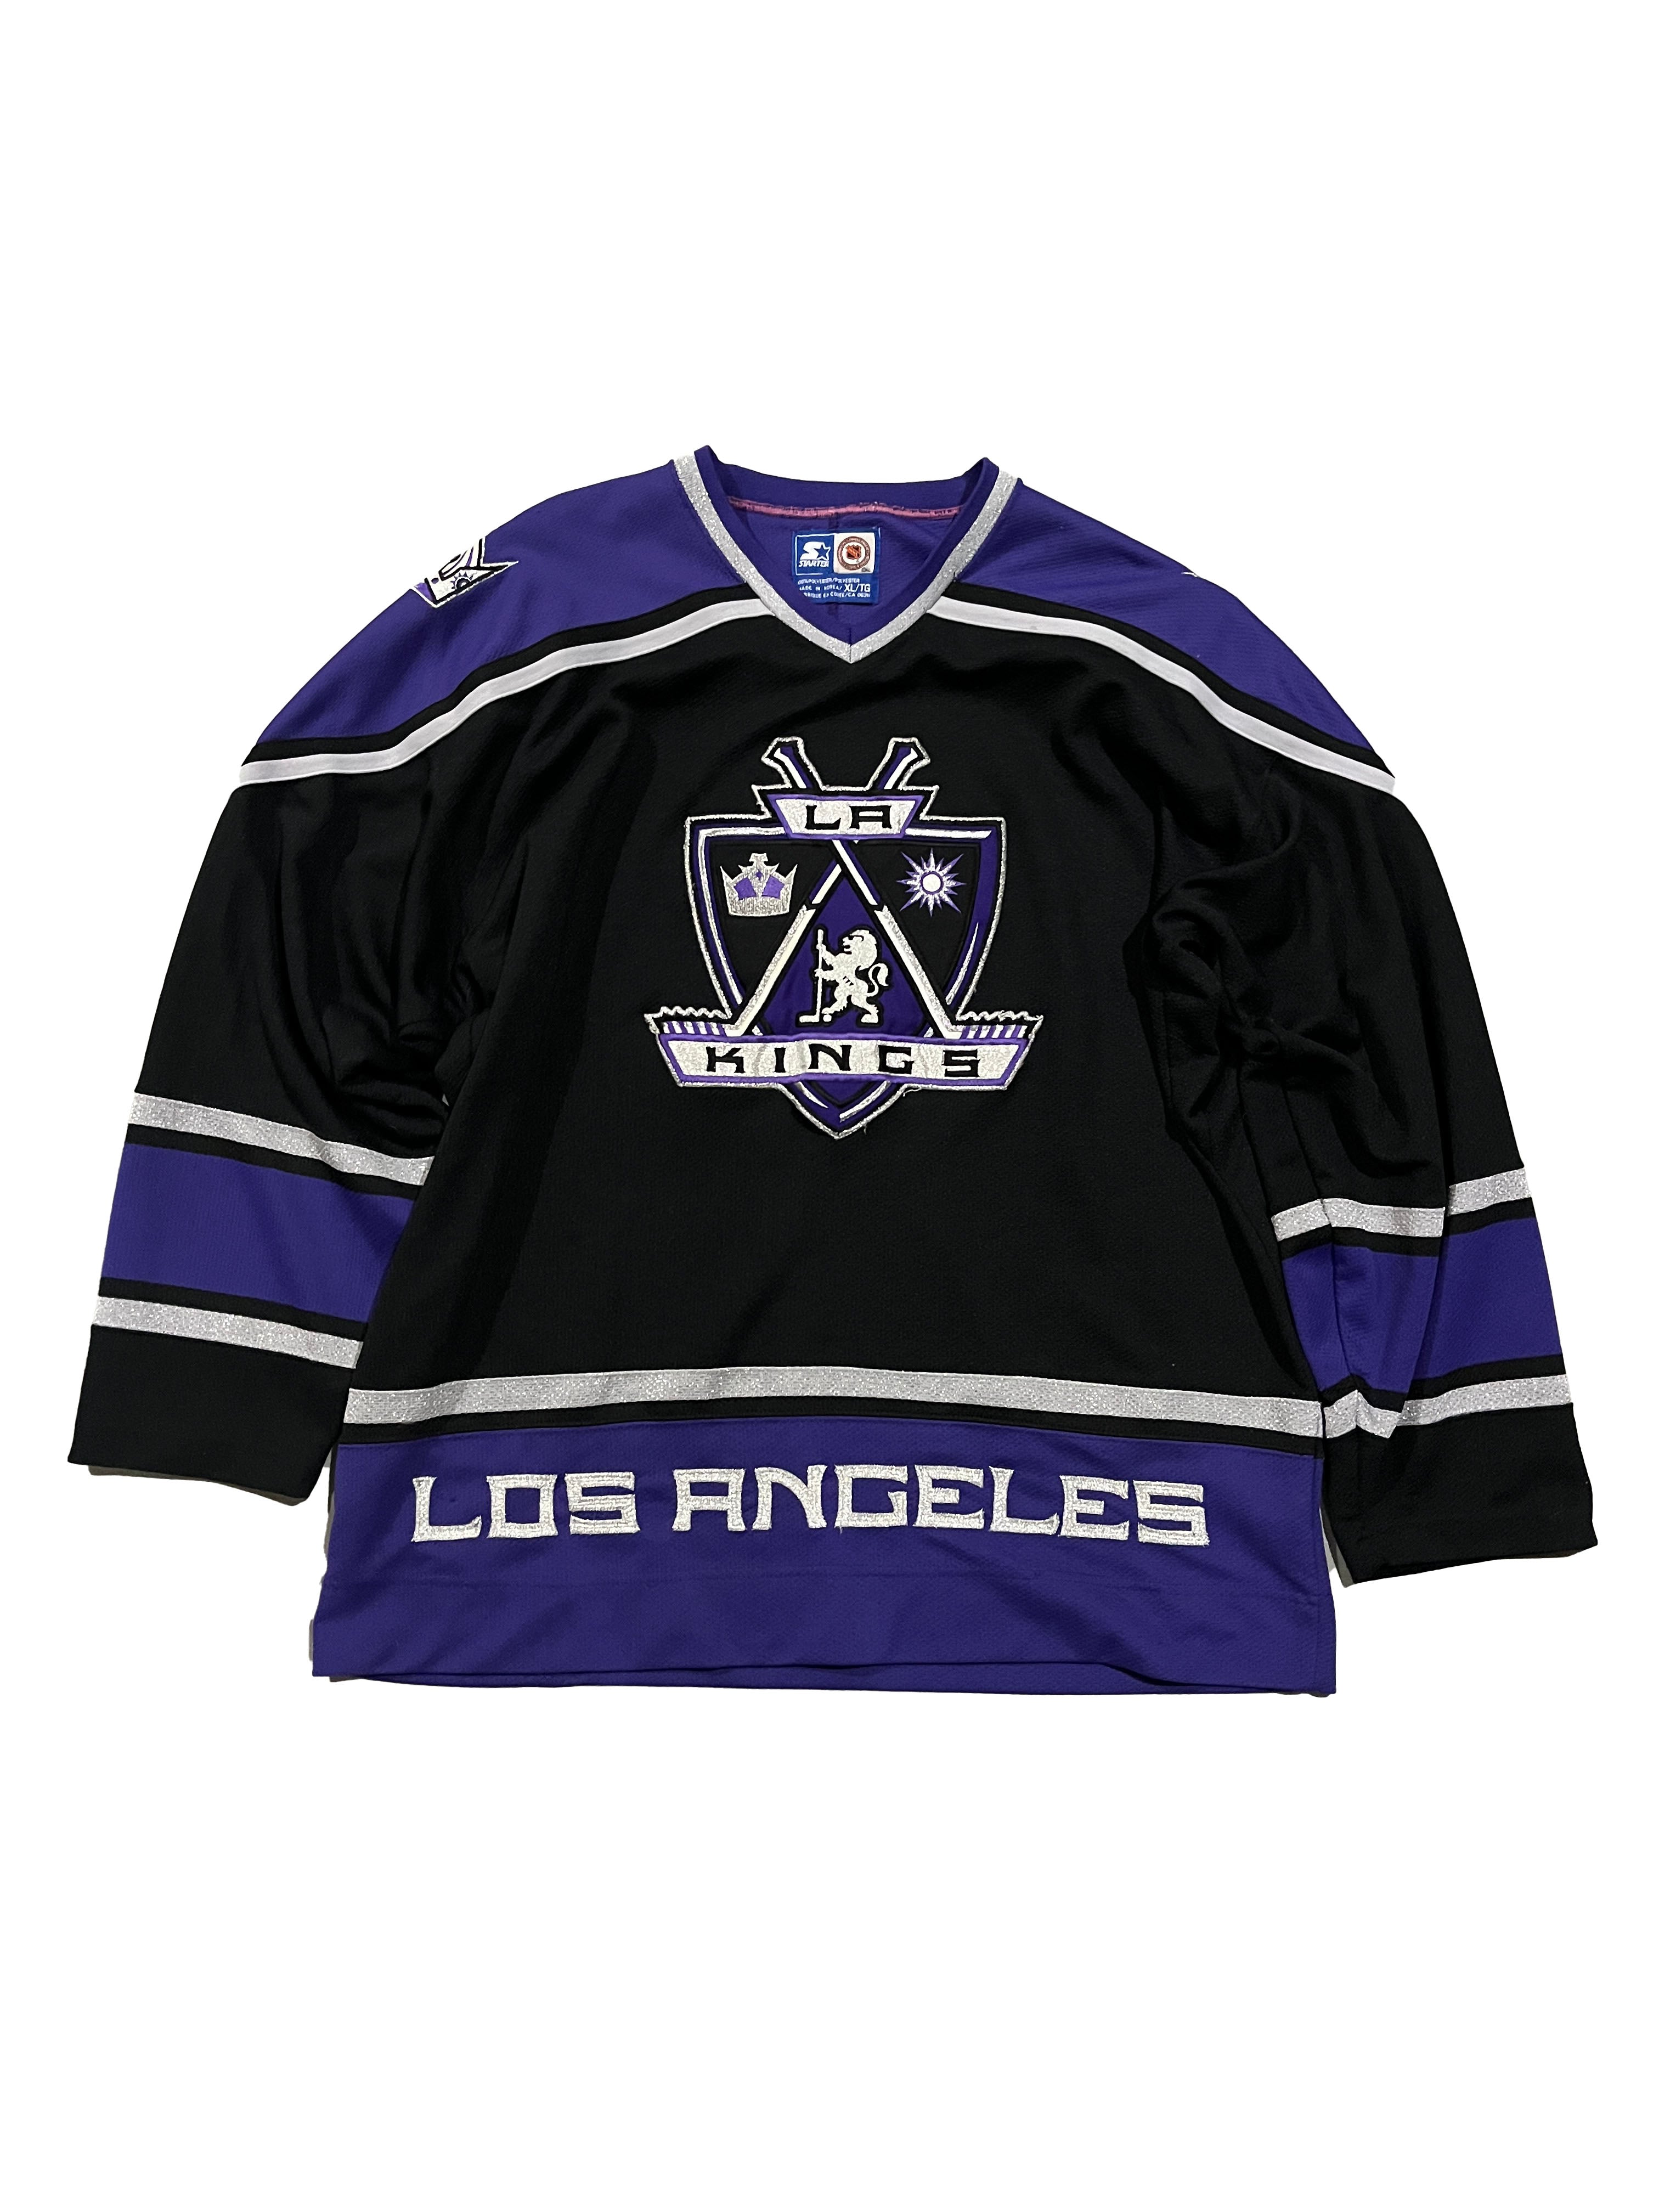 Authentic Rare Vintage Starter NHL Los Angeles Kings Hockey Jersey